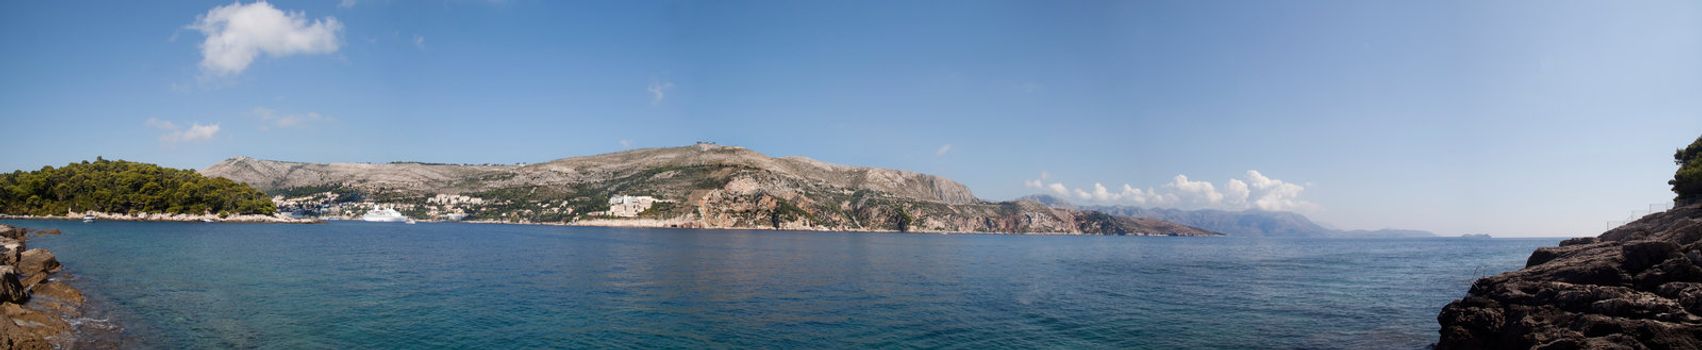 A panoramic view of the hill side in Dubrovnik, Croatia